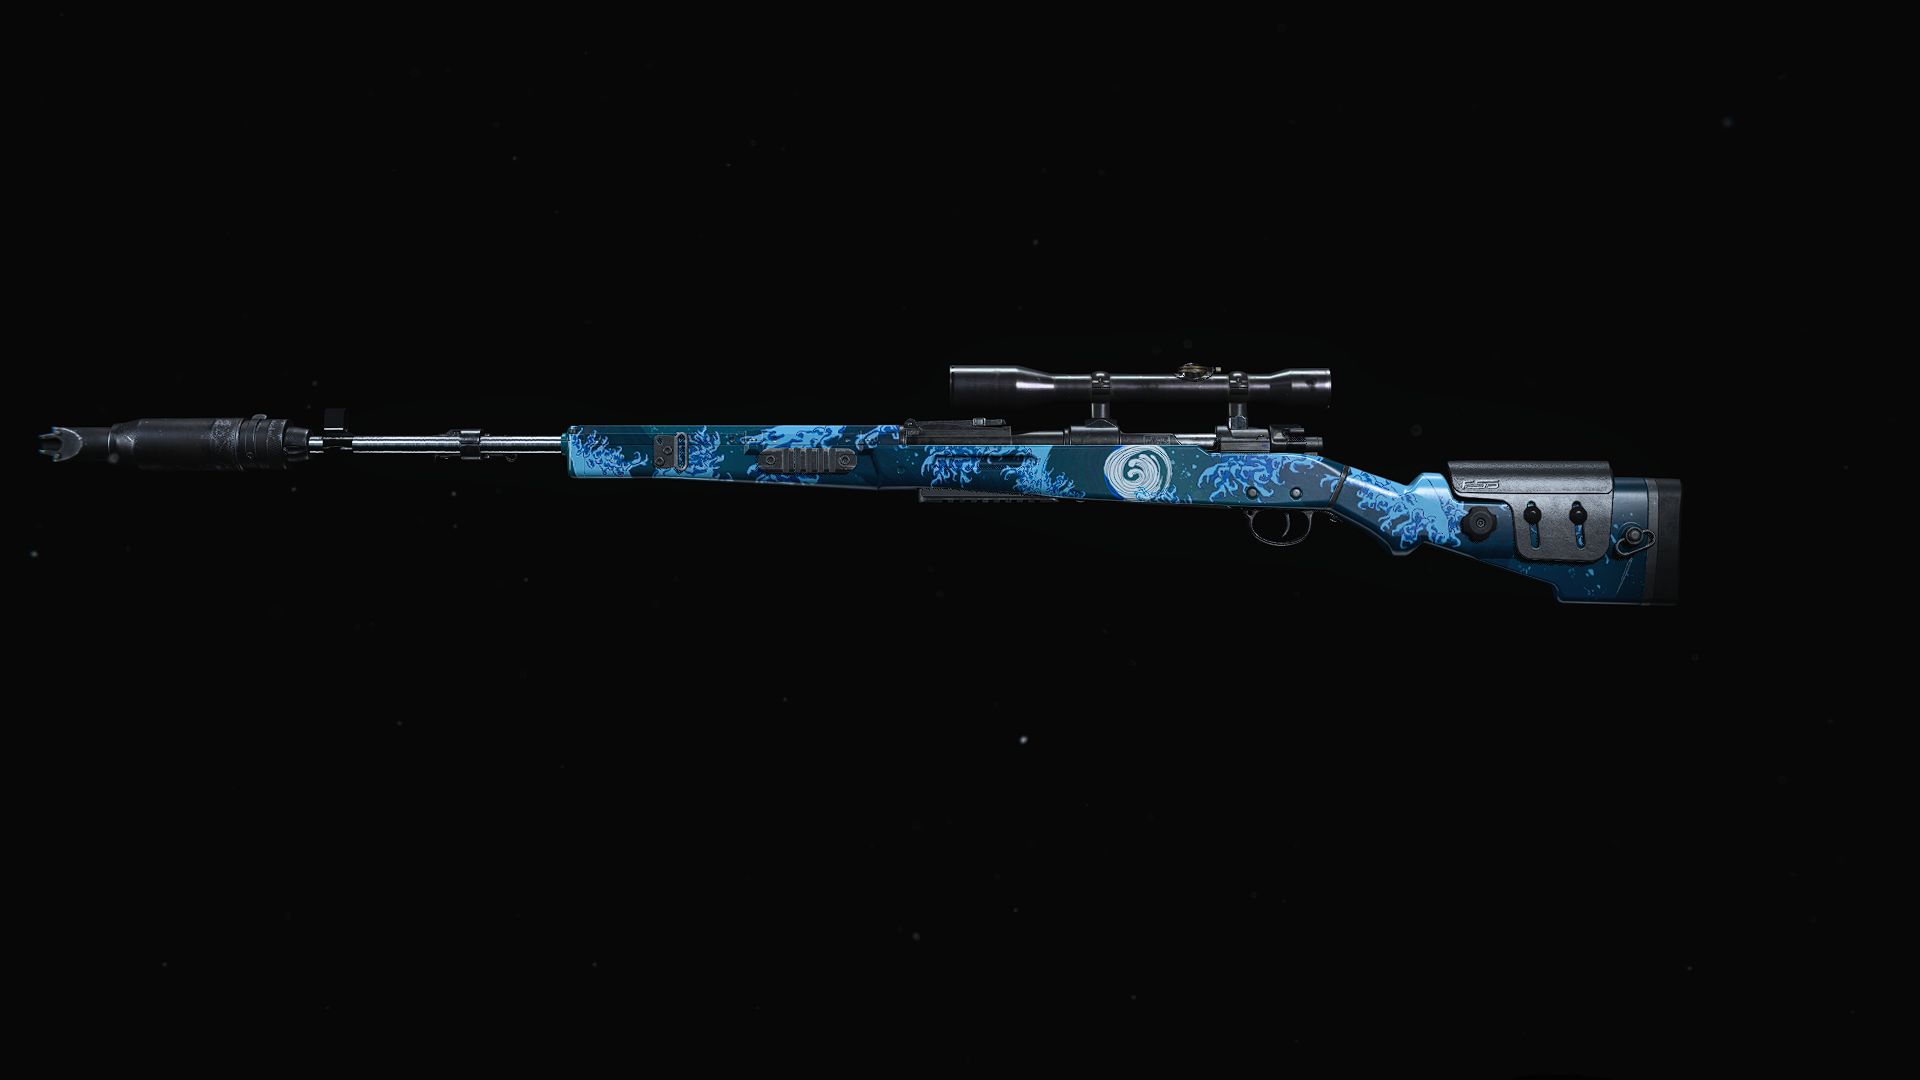 CoD Vanguard launch weapons: The Kar98k as pictured in Warzone.